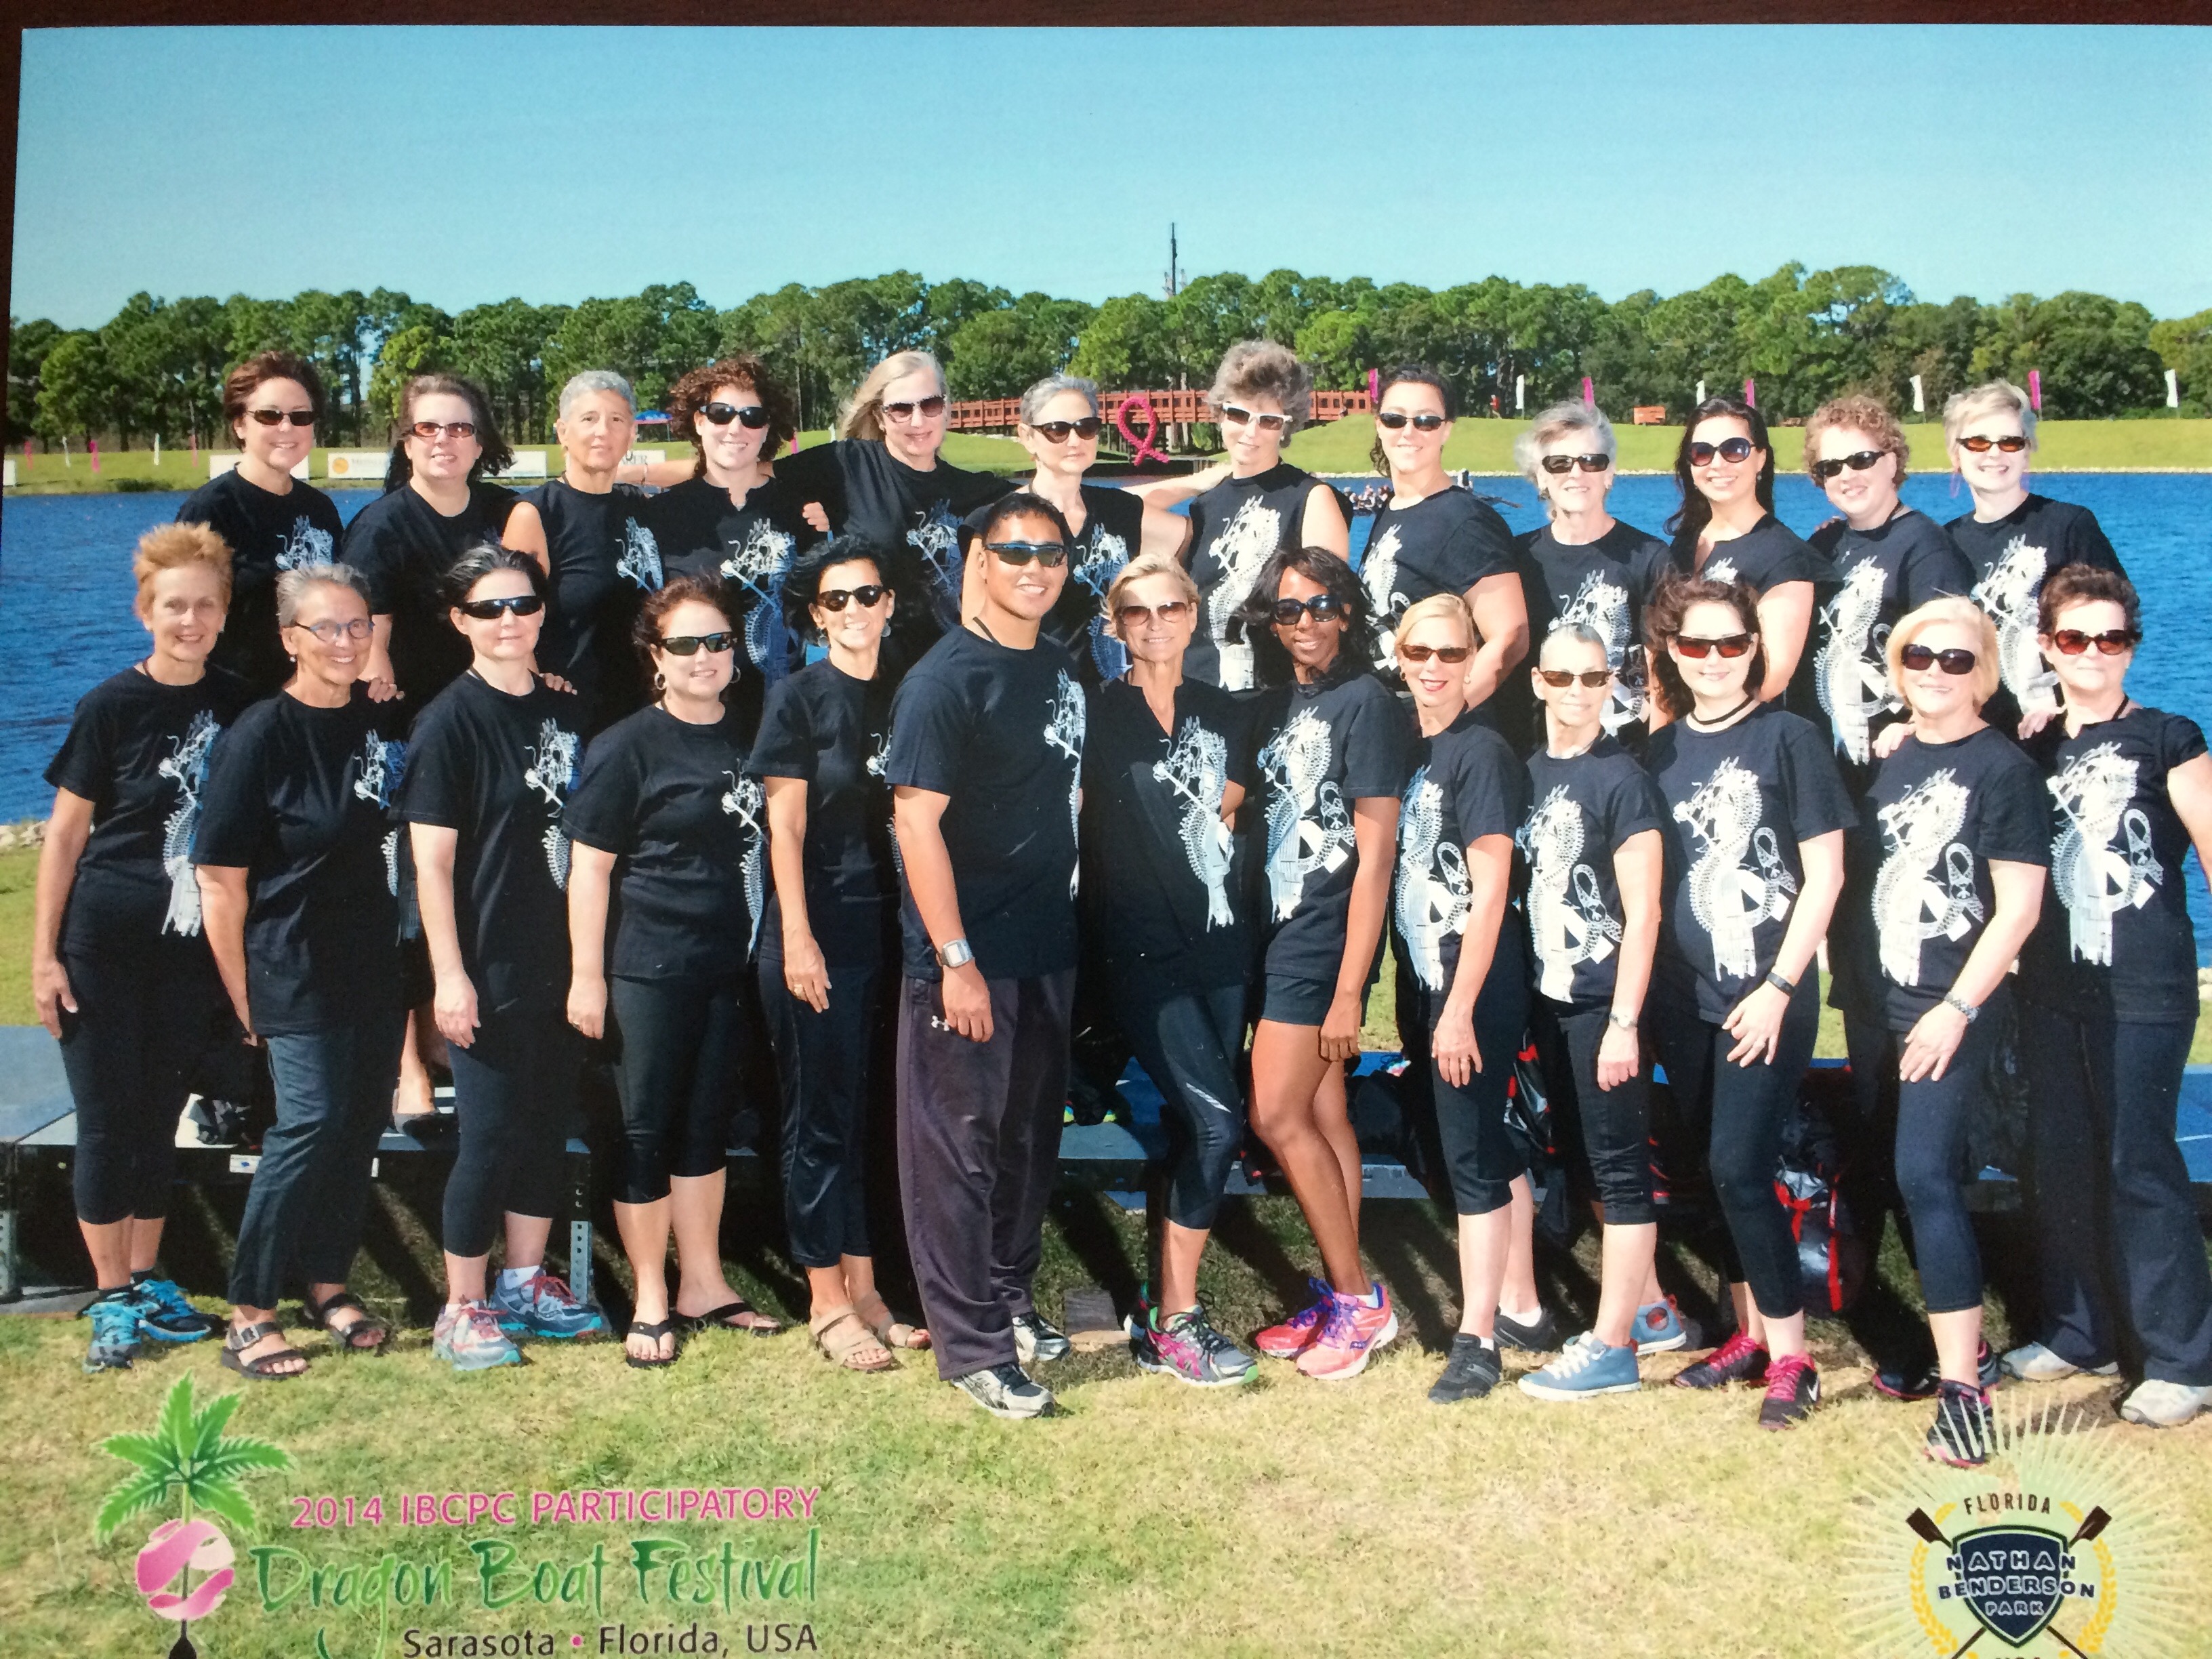 Members of the Empire Dragon Boat NYC team with their coaches, James Lozado (front row, left of center) and Akila Simon (front row, right of center) with captain Donna Wilson (front row center).